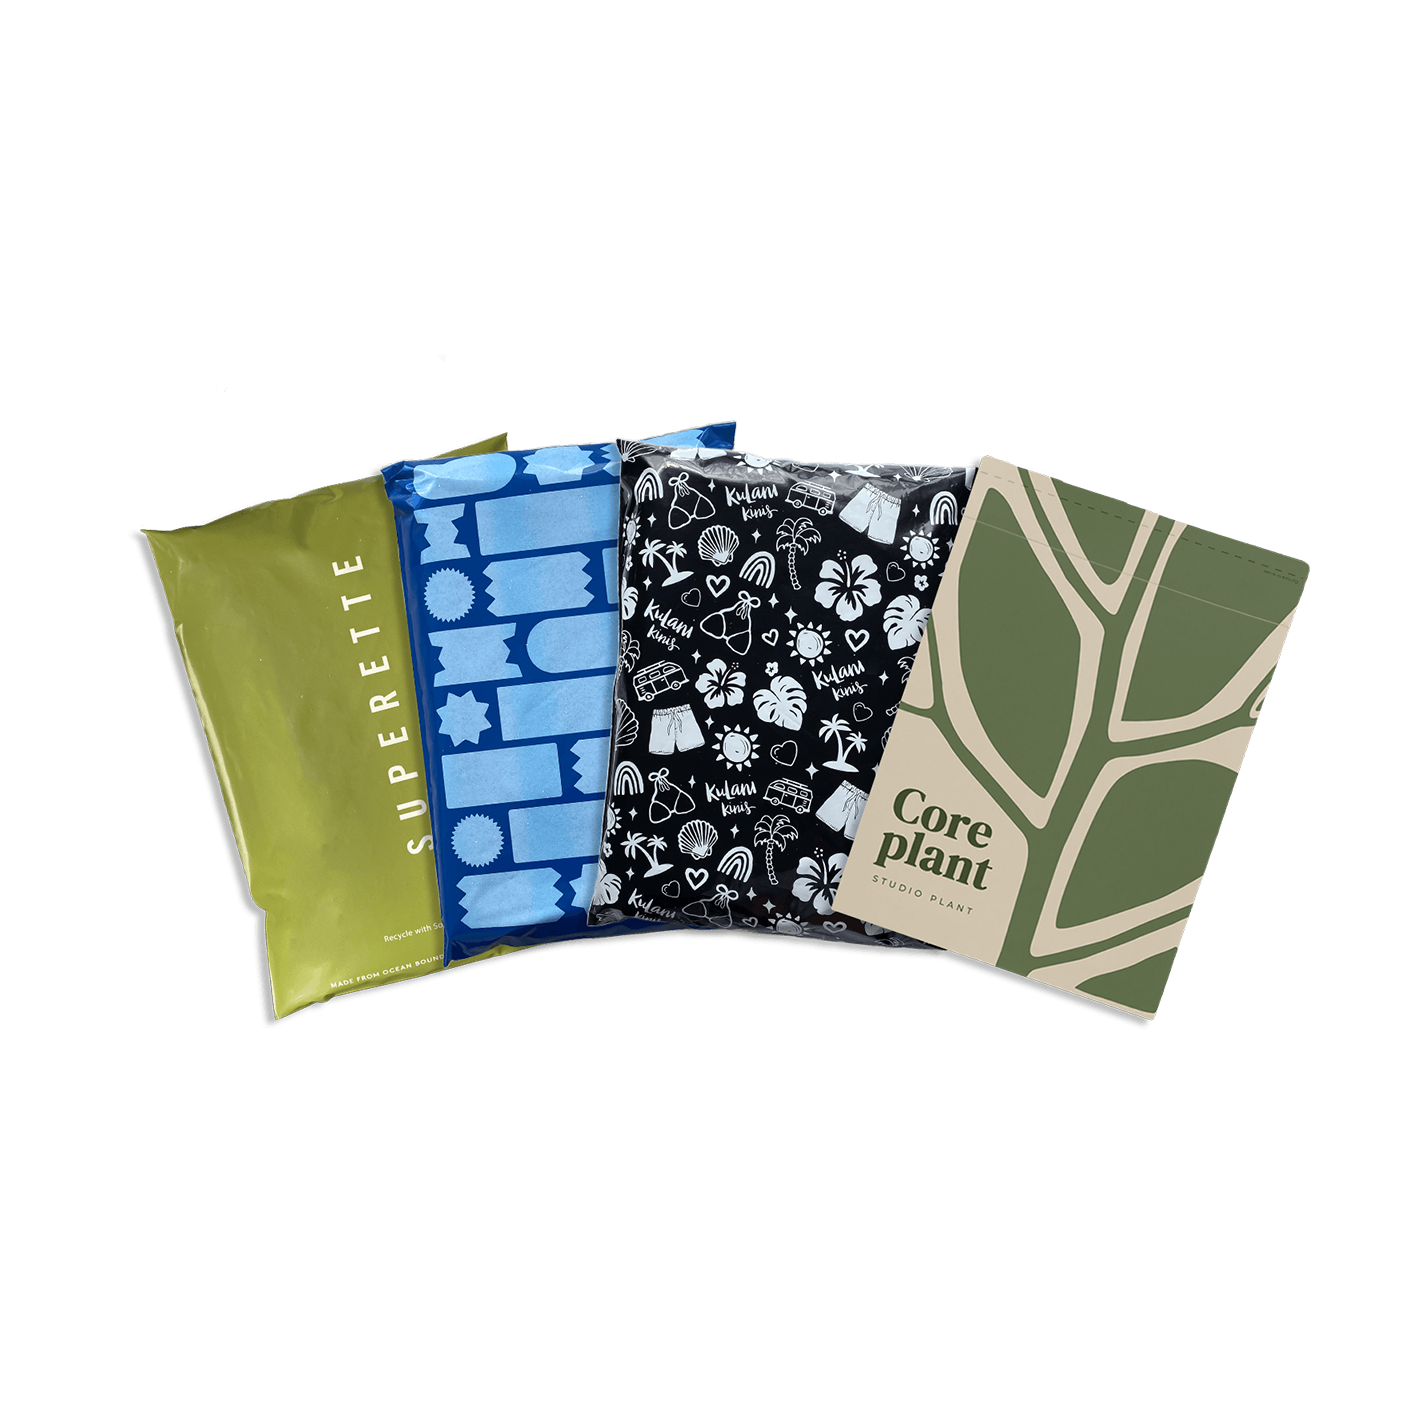 Four custom printed shipping mailers with unique designs: a green mailer with brand logo, another with geometric shapes, the third with beach icons, last with a leaf patterns.